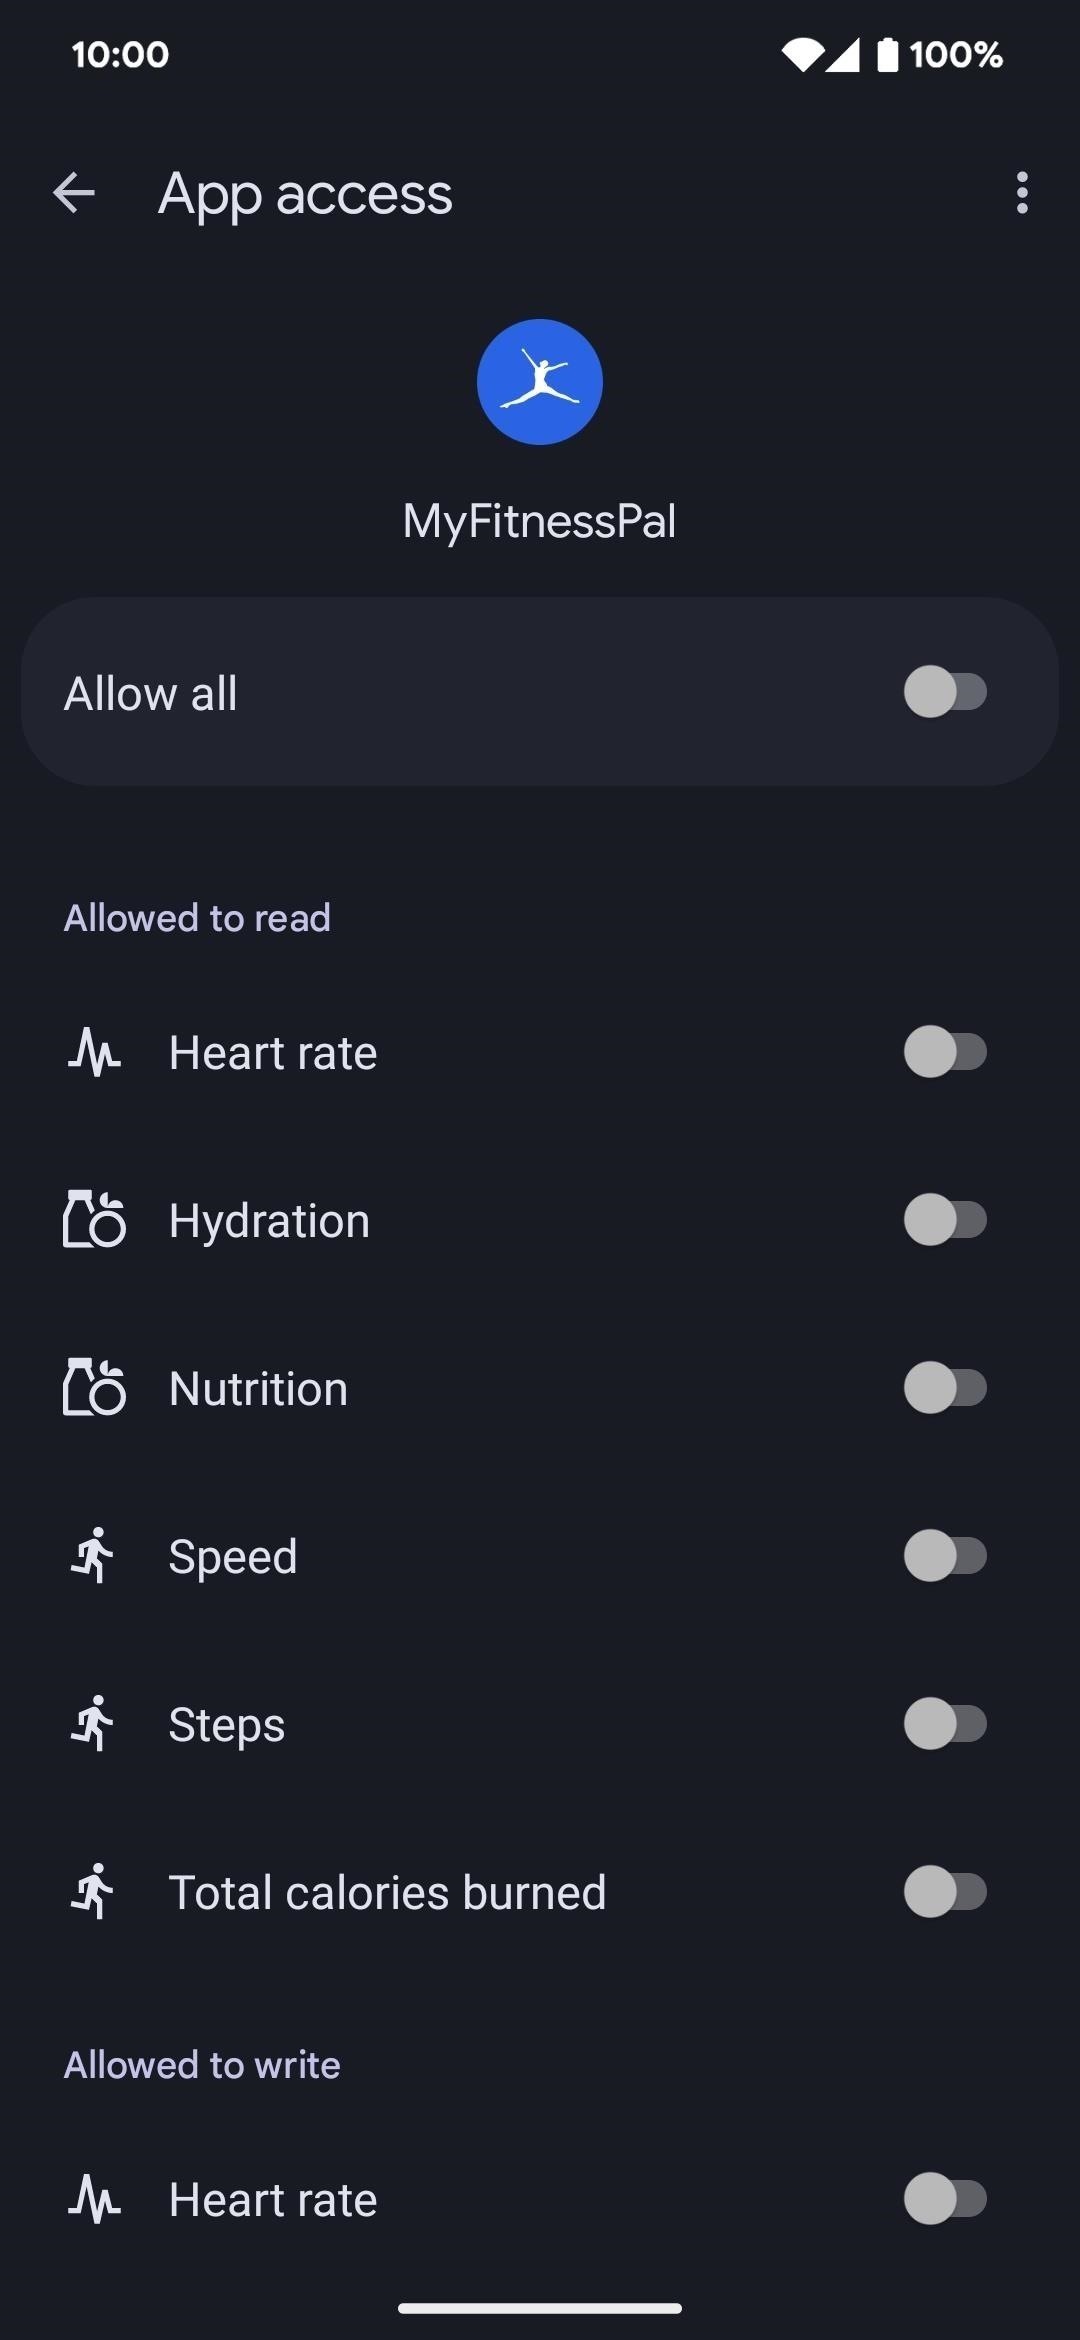 Use Health Connect to Sync Your Health and Fitness Data Between Google Fit, MyFitnessPal, and Other Android Apps